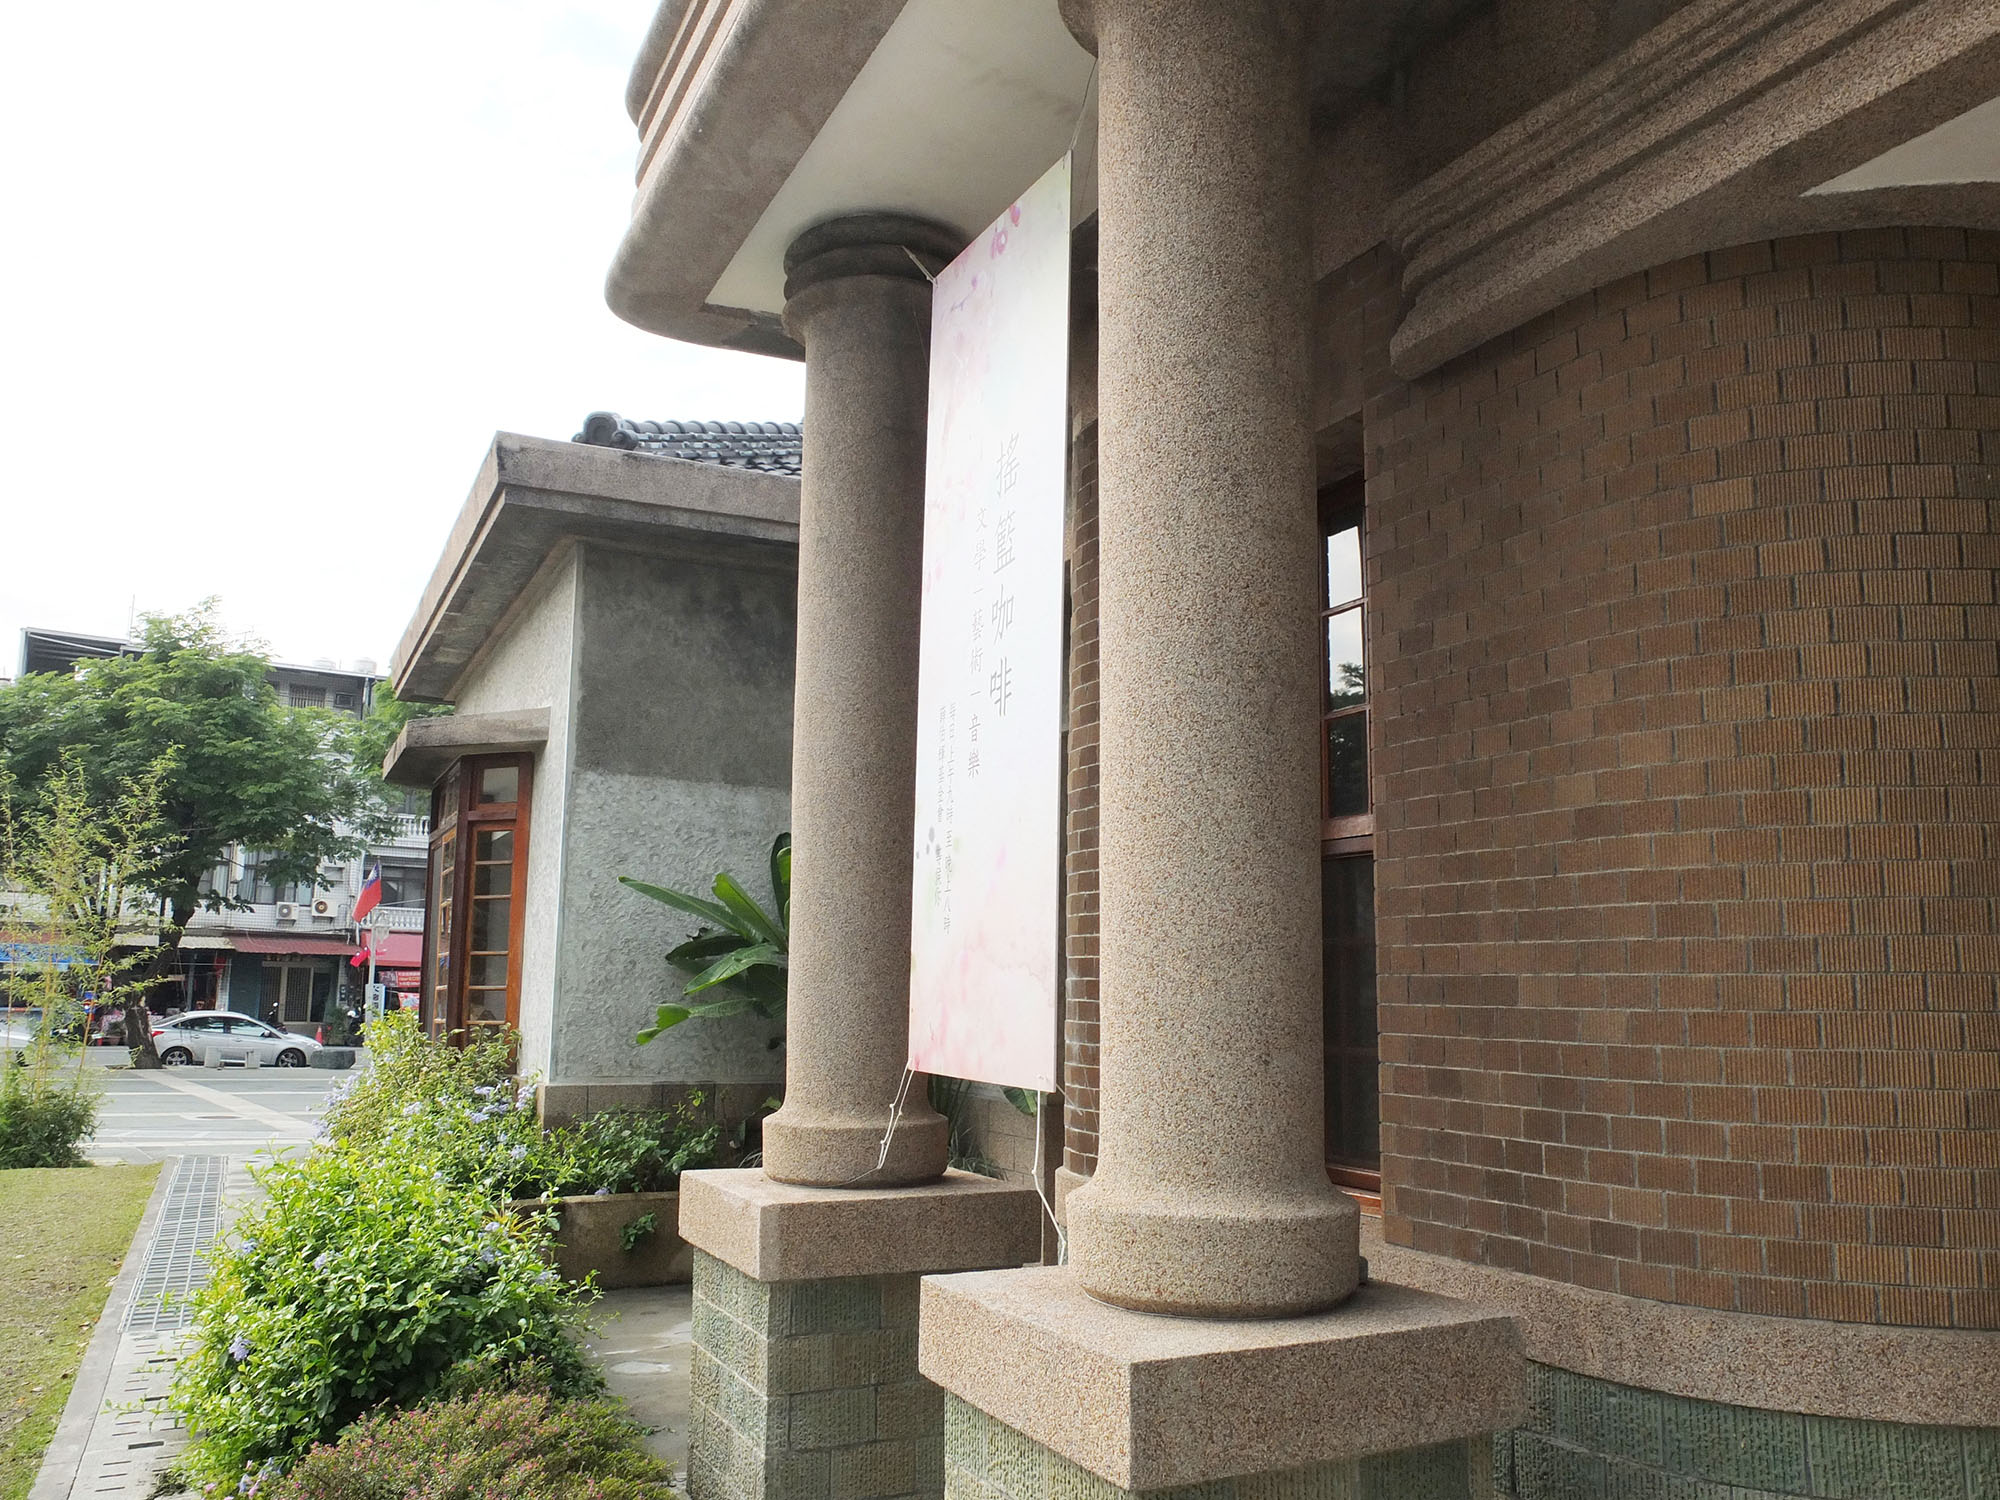 formerly the Meinong Police Station.